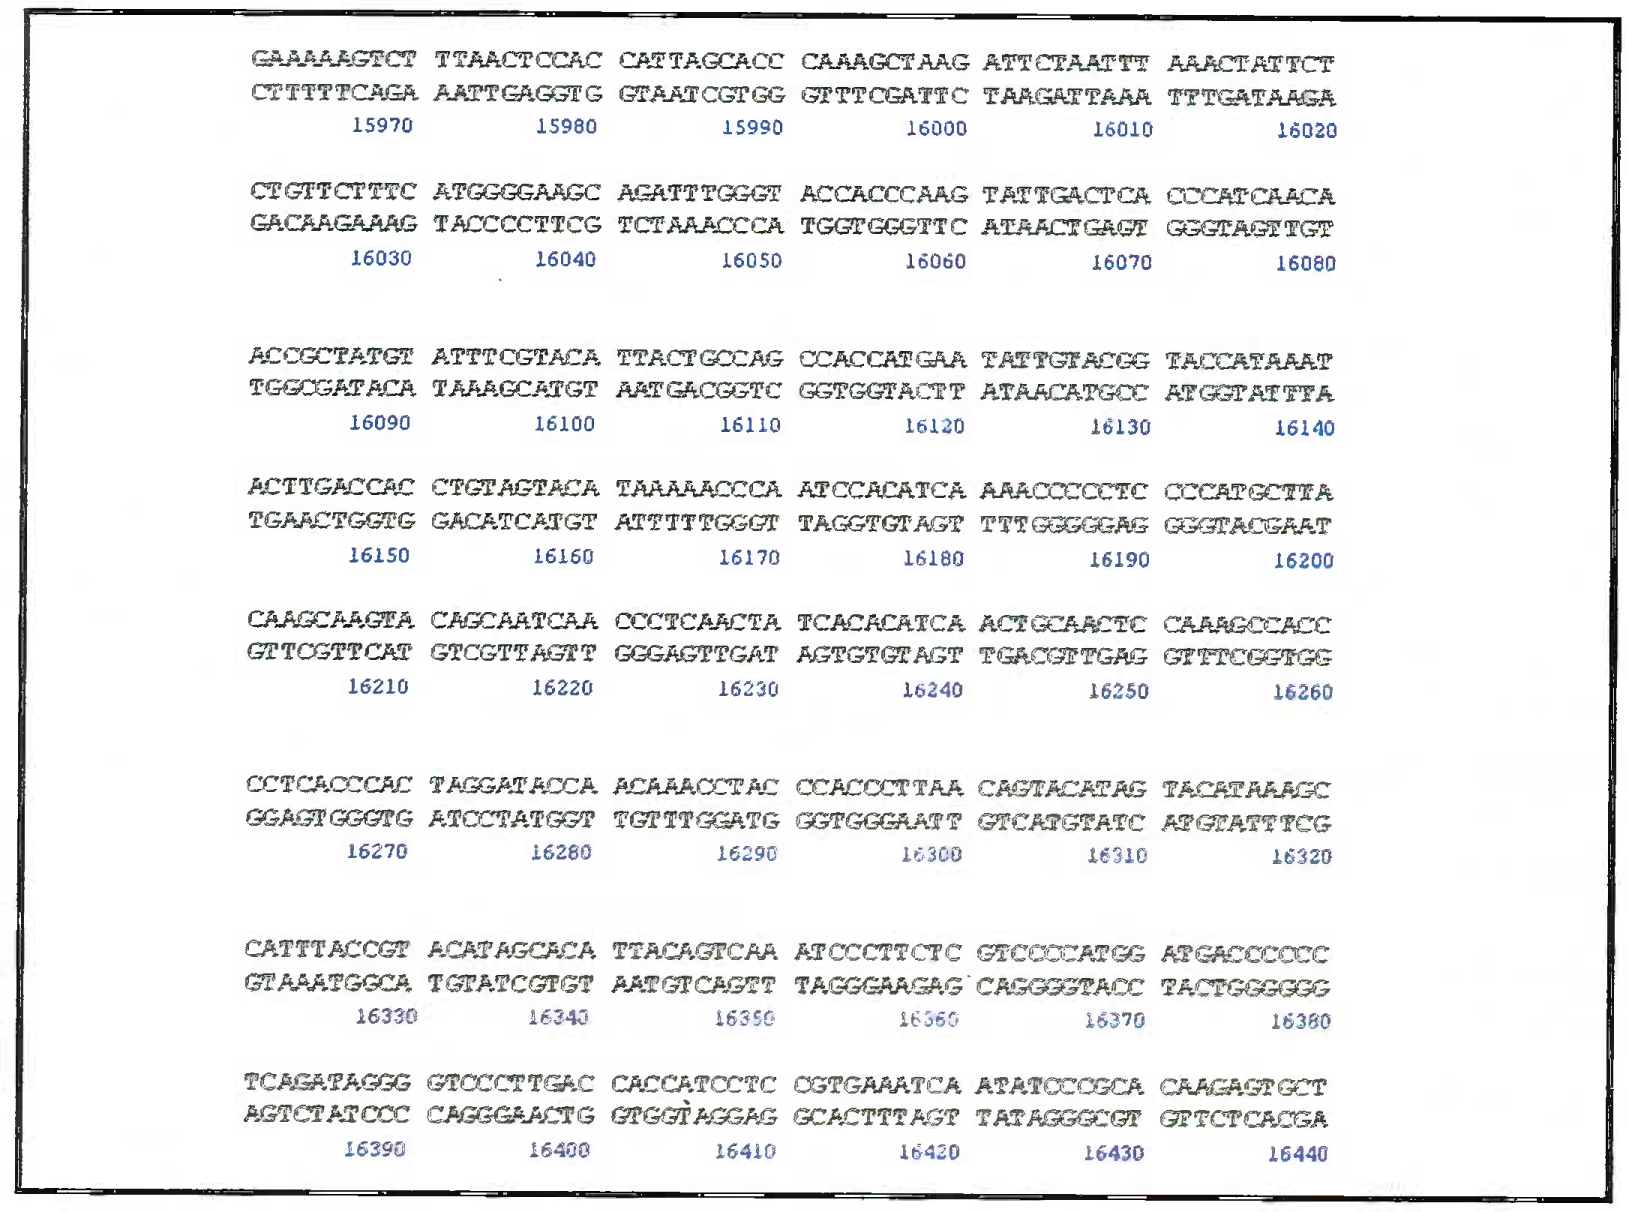 Amp FISTR system: 9 STR system showing the DNA of individual separated on known loci using three fluorescent labels. The red row is the standard molecular ladder with which the PCR product size can be compared